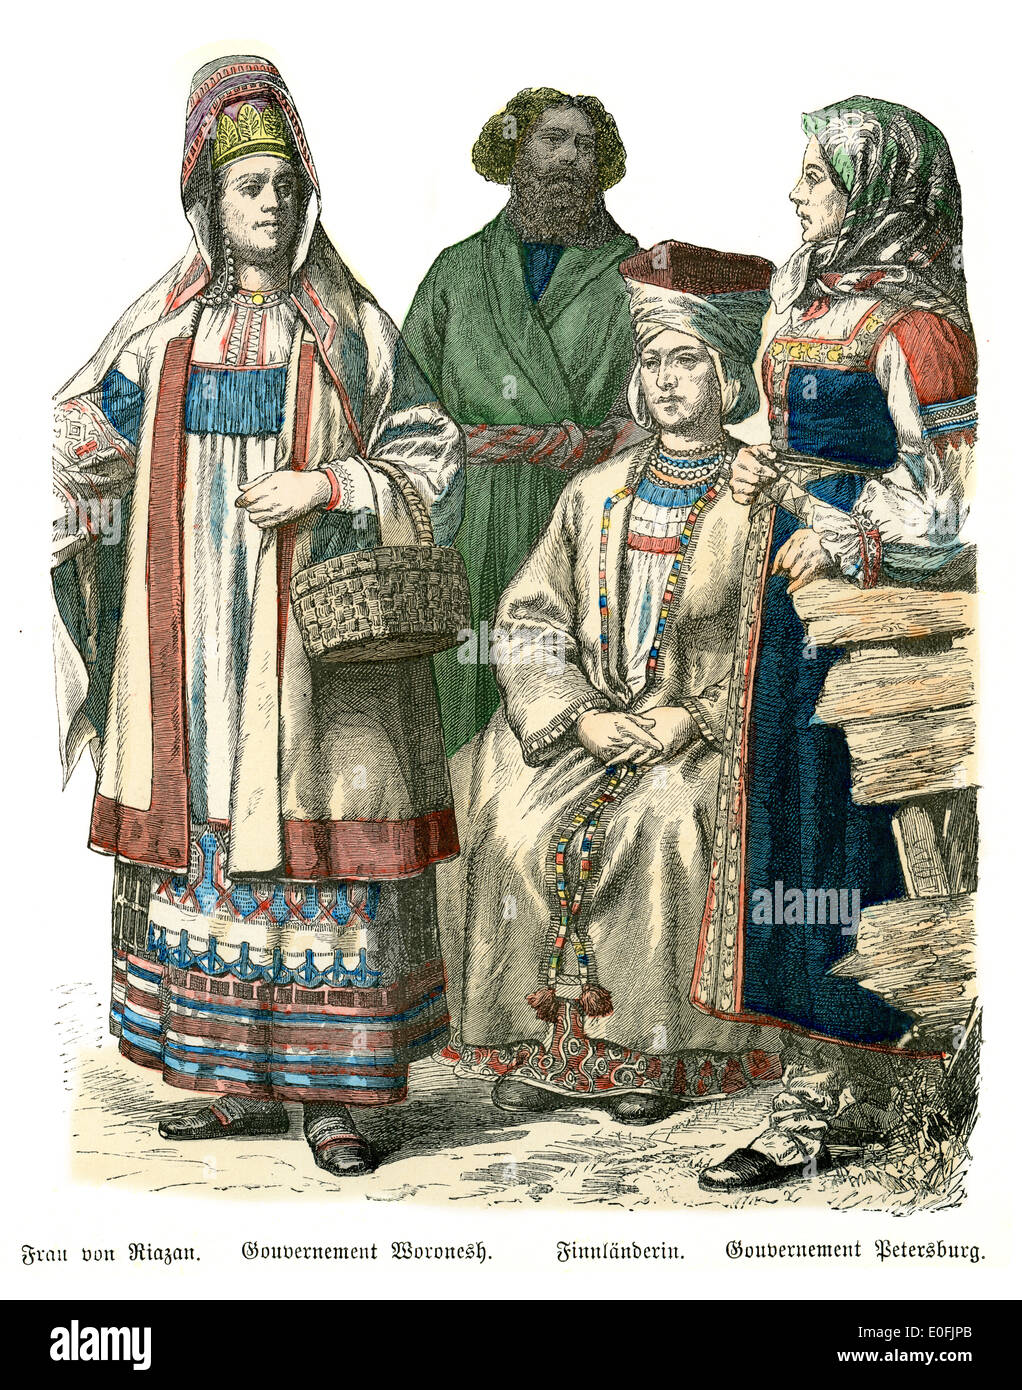 Traditional costumes of Russia, 19th Century. Woman of riazan, Government Woroneth, Finish woman, and Government Petrograd Stock Photo